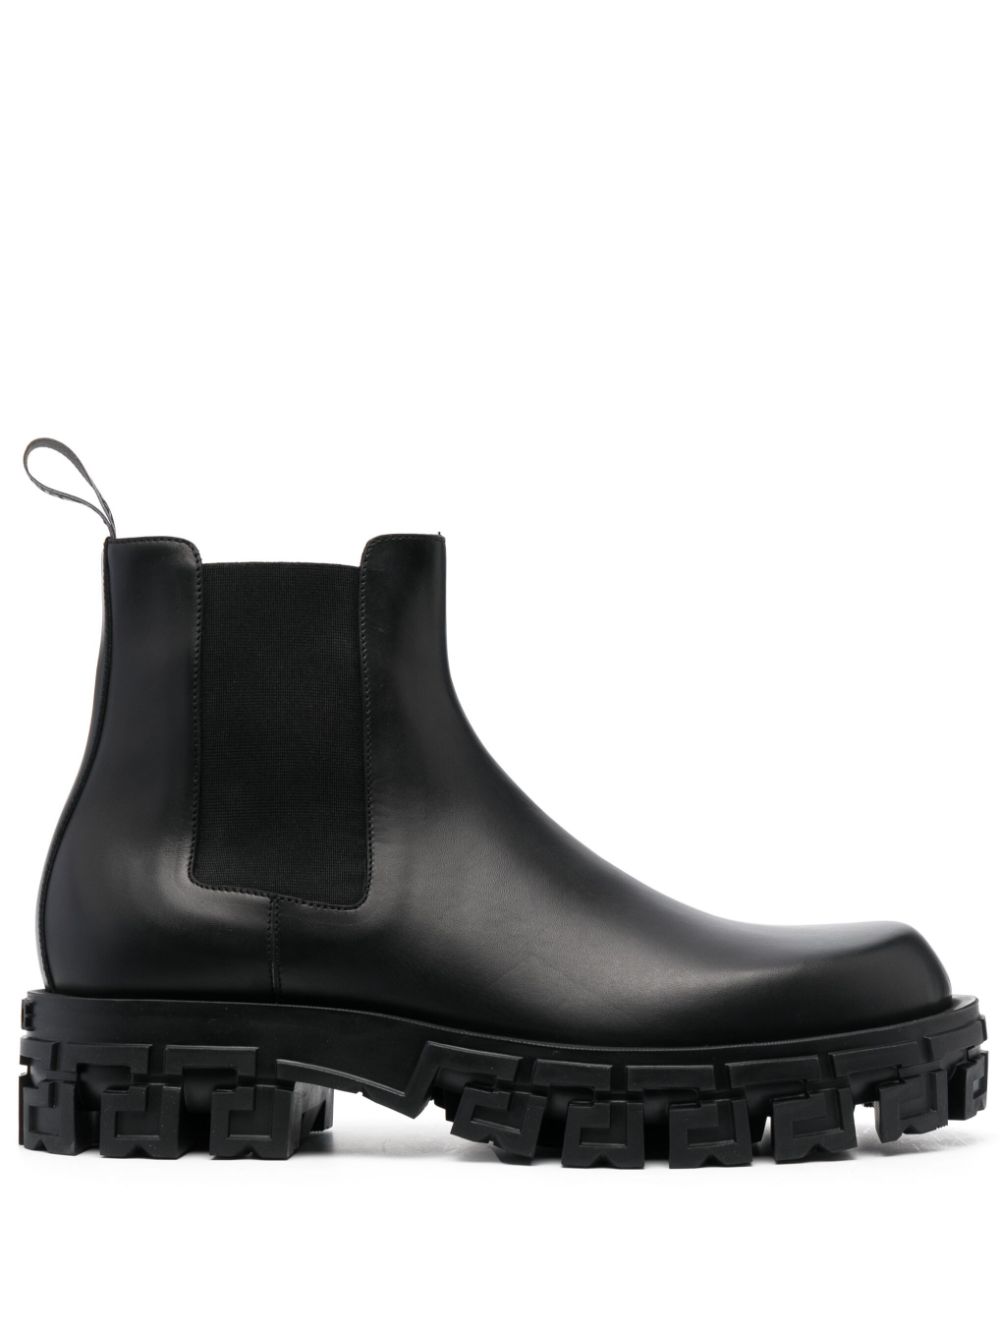 Versace Greca-sole ankle boots - Black